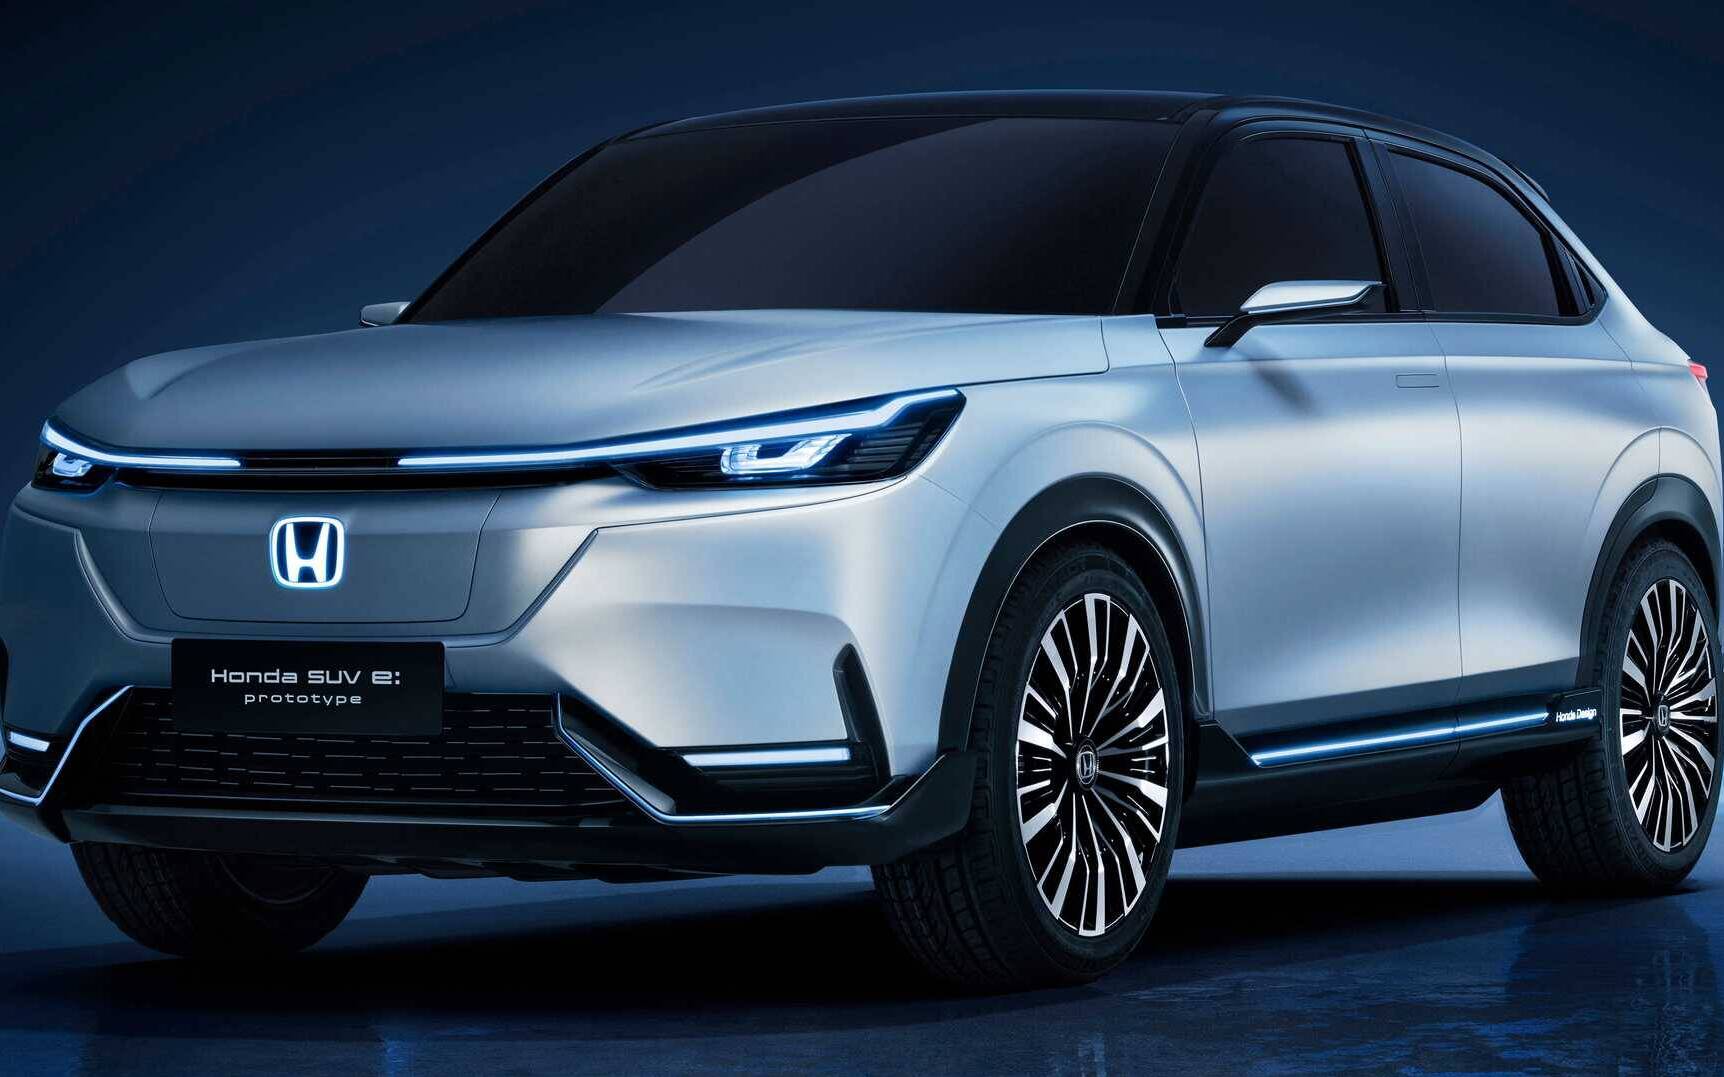 New Honda Prologue SUV - Next Chapter in Brand’s EV Direction - Indo